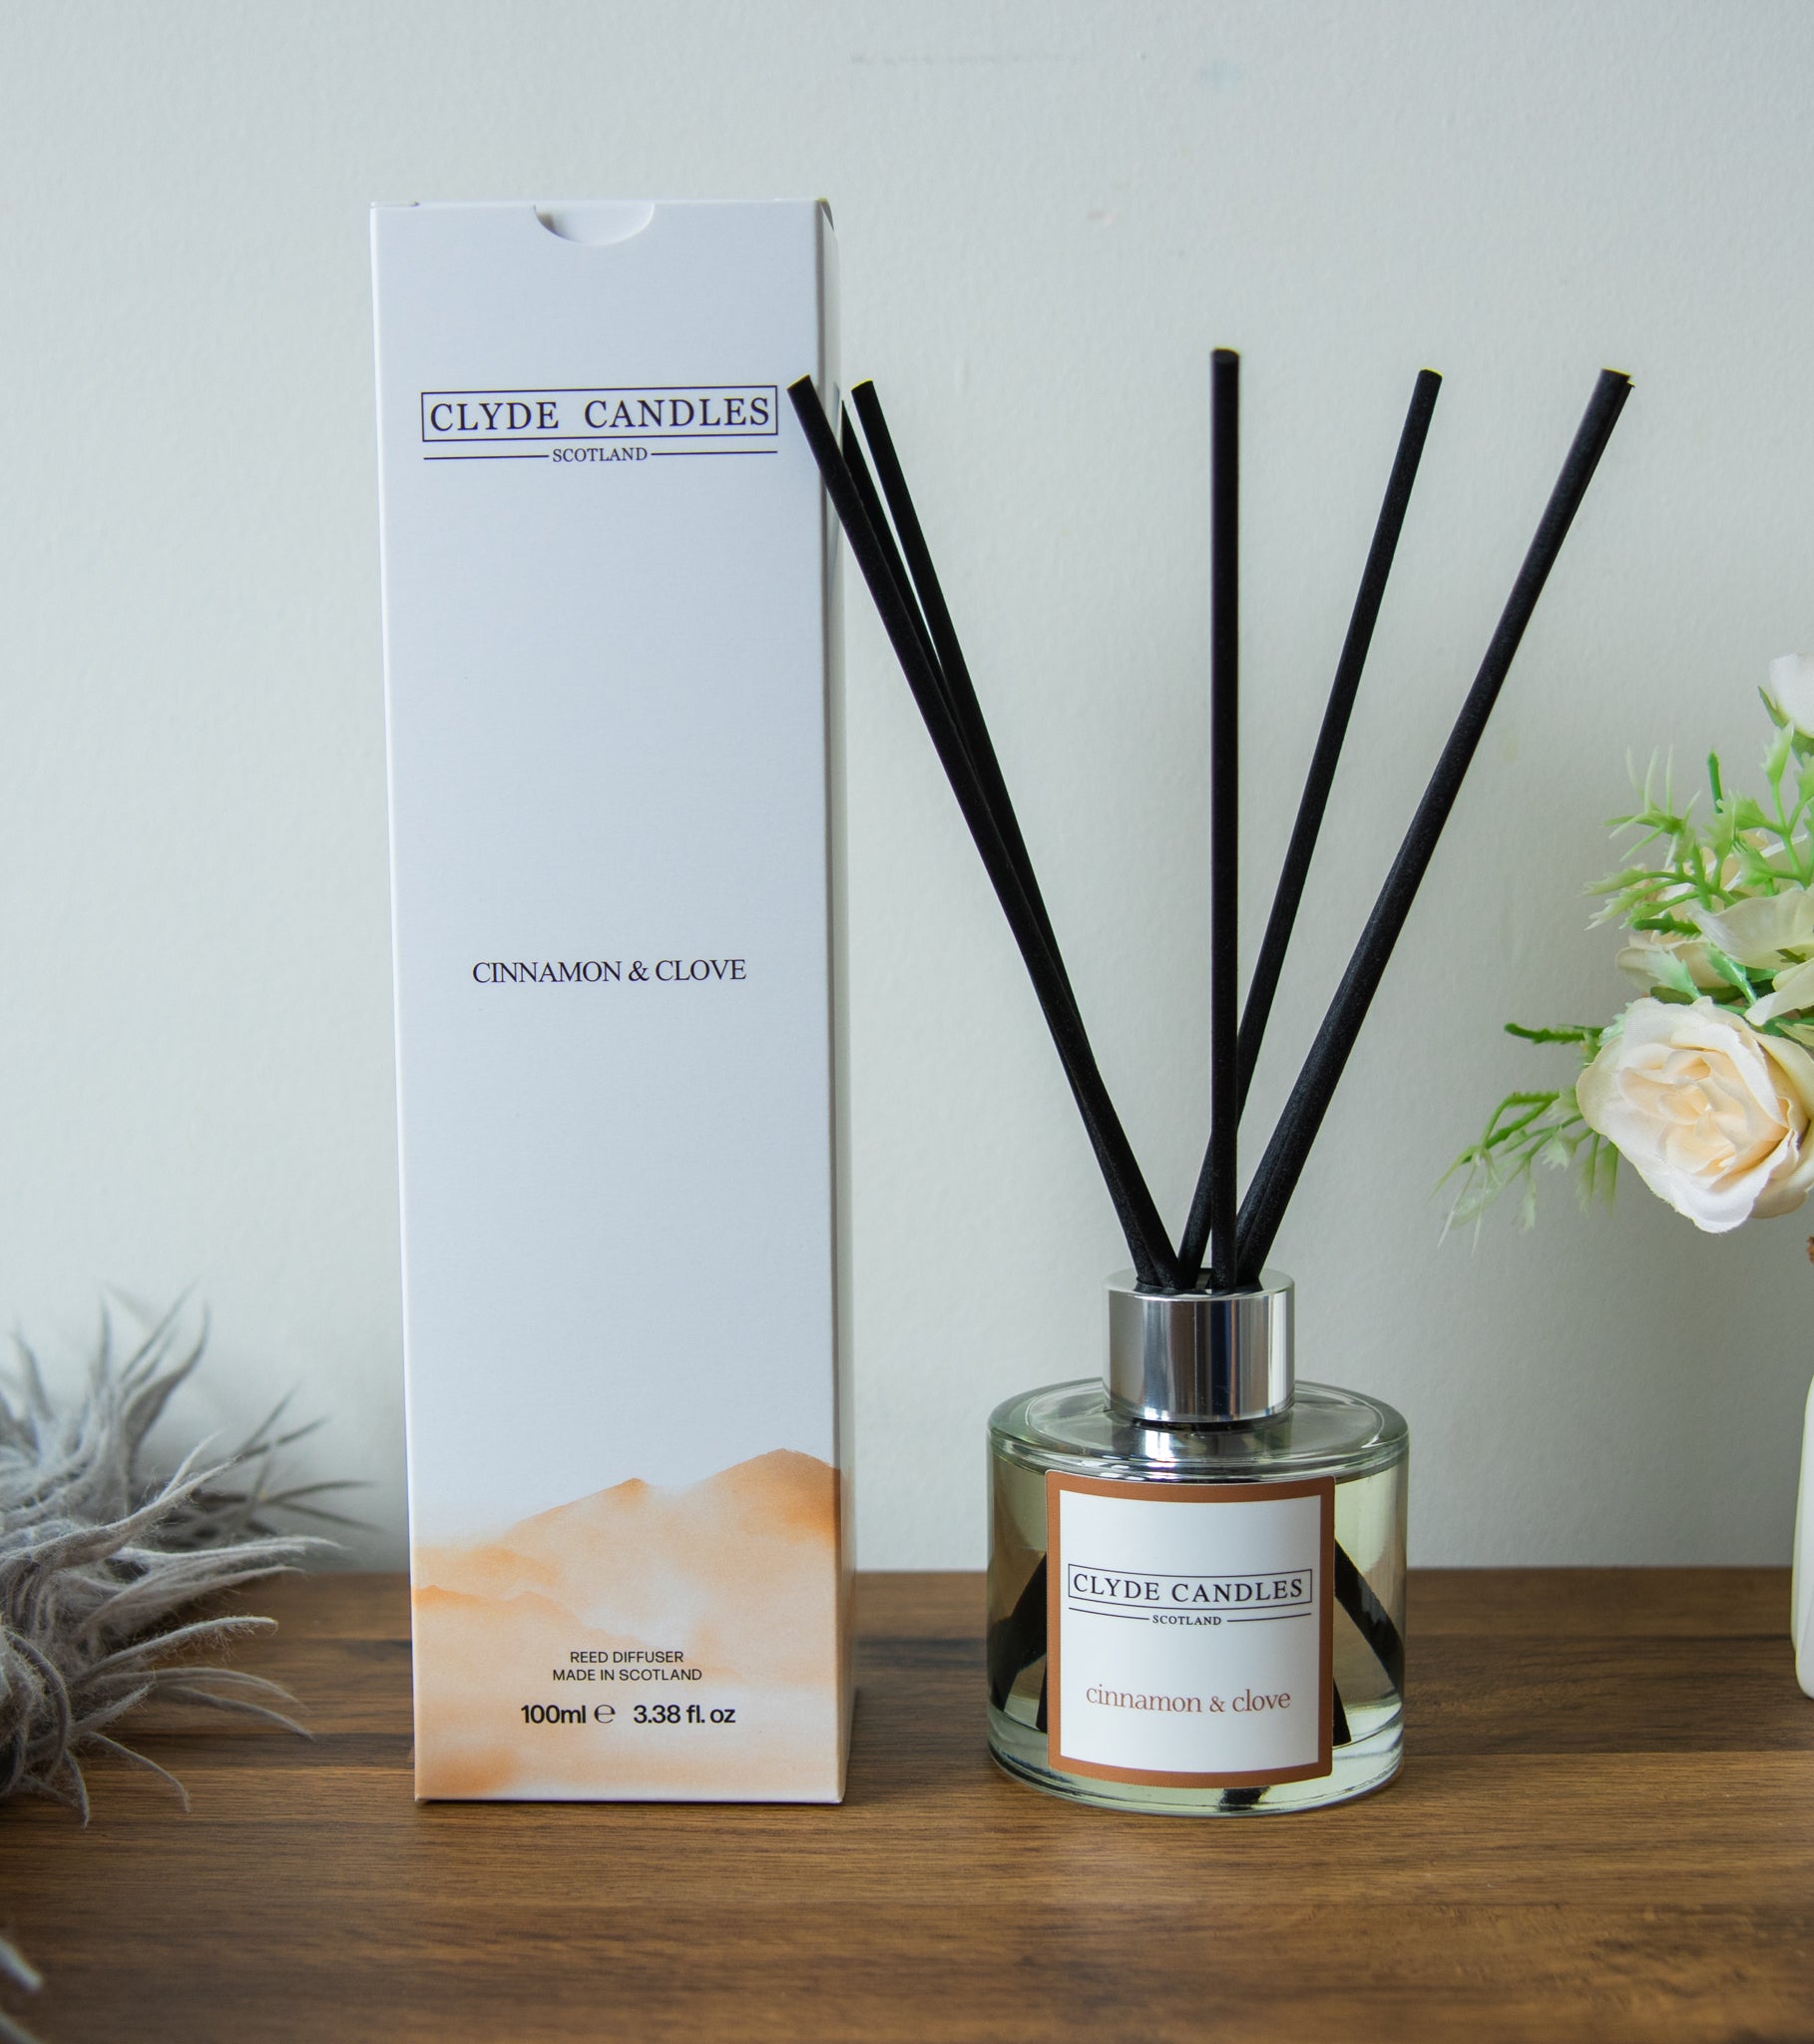 Cinnamon & Clove Reed Diffuser - Clyde Candles, Luxury Diffuser Oil with a Set of 7 Fibre Sticks, 100ml, Best Aroma Scent for Home, Kitchen, Living Room, Bathroom. Fragrance Diffusers set with sticks